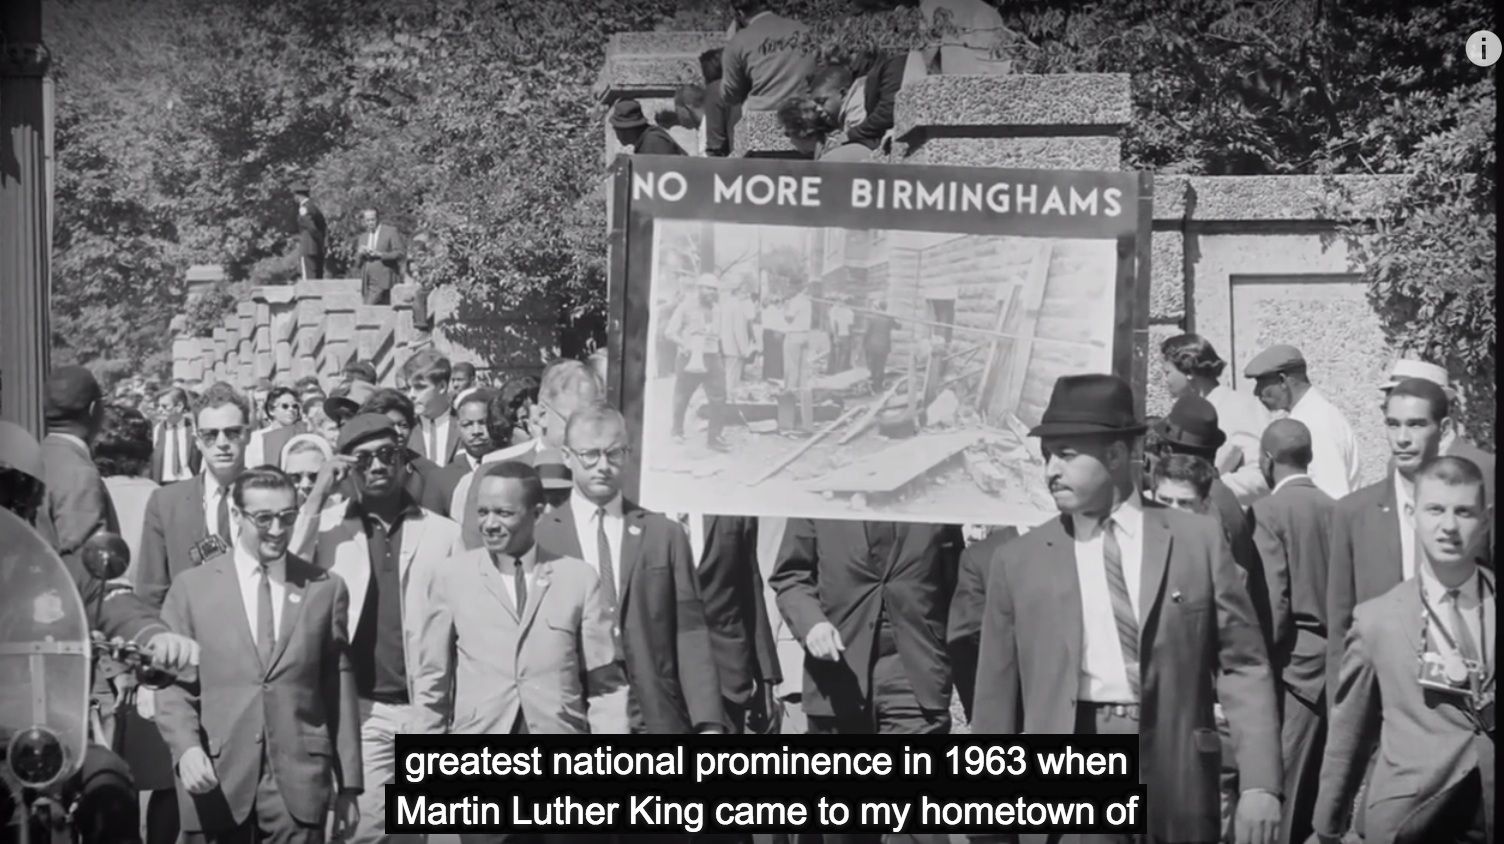 MLK Day resources for kids: Birmingham explained, on Crash Course US History video series